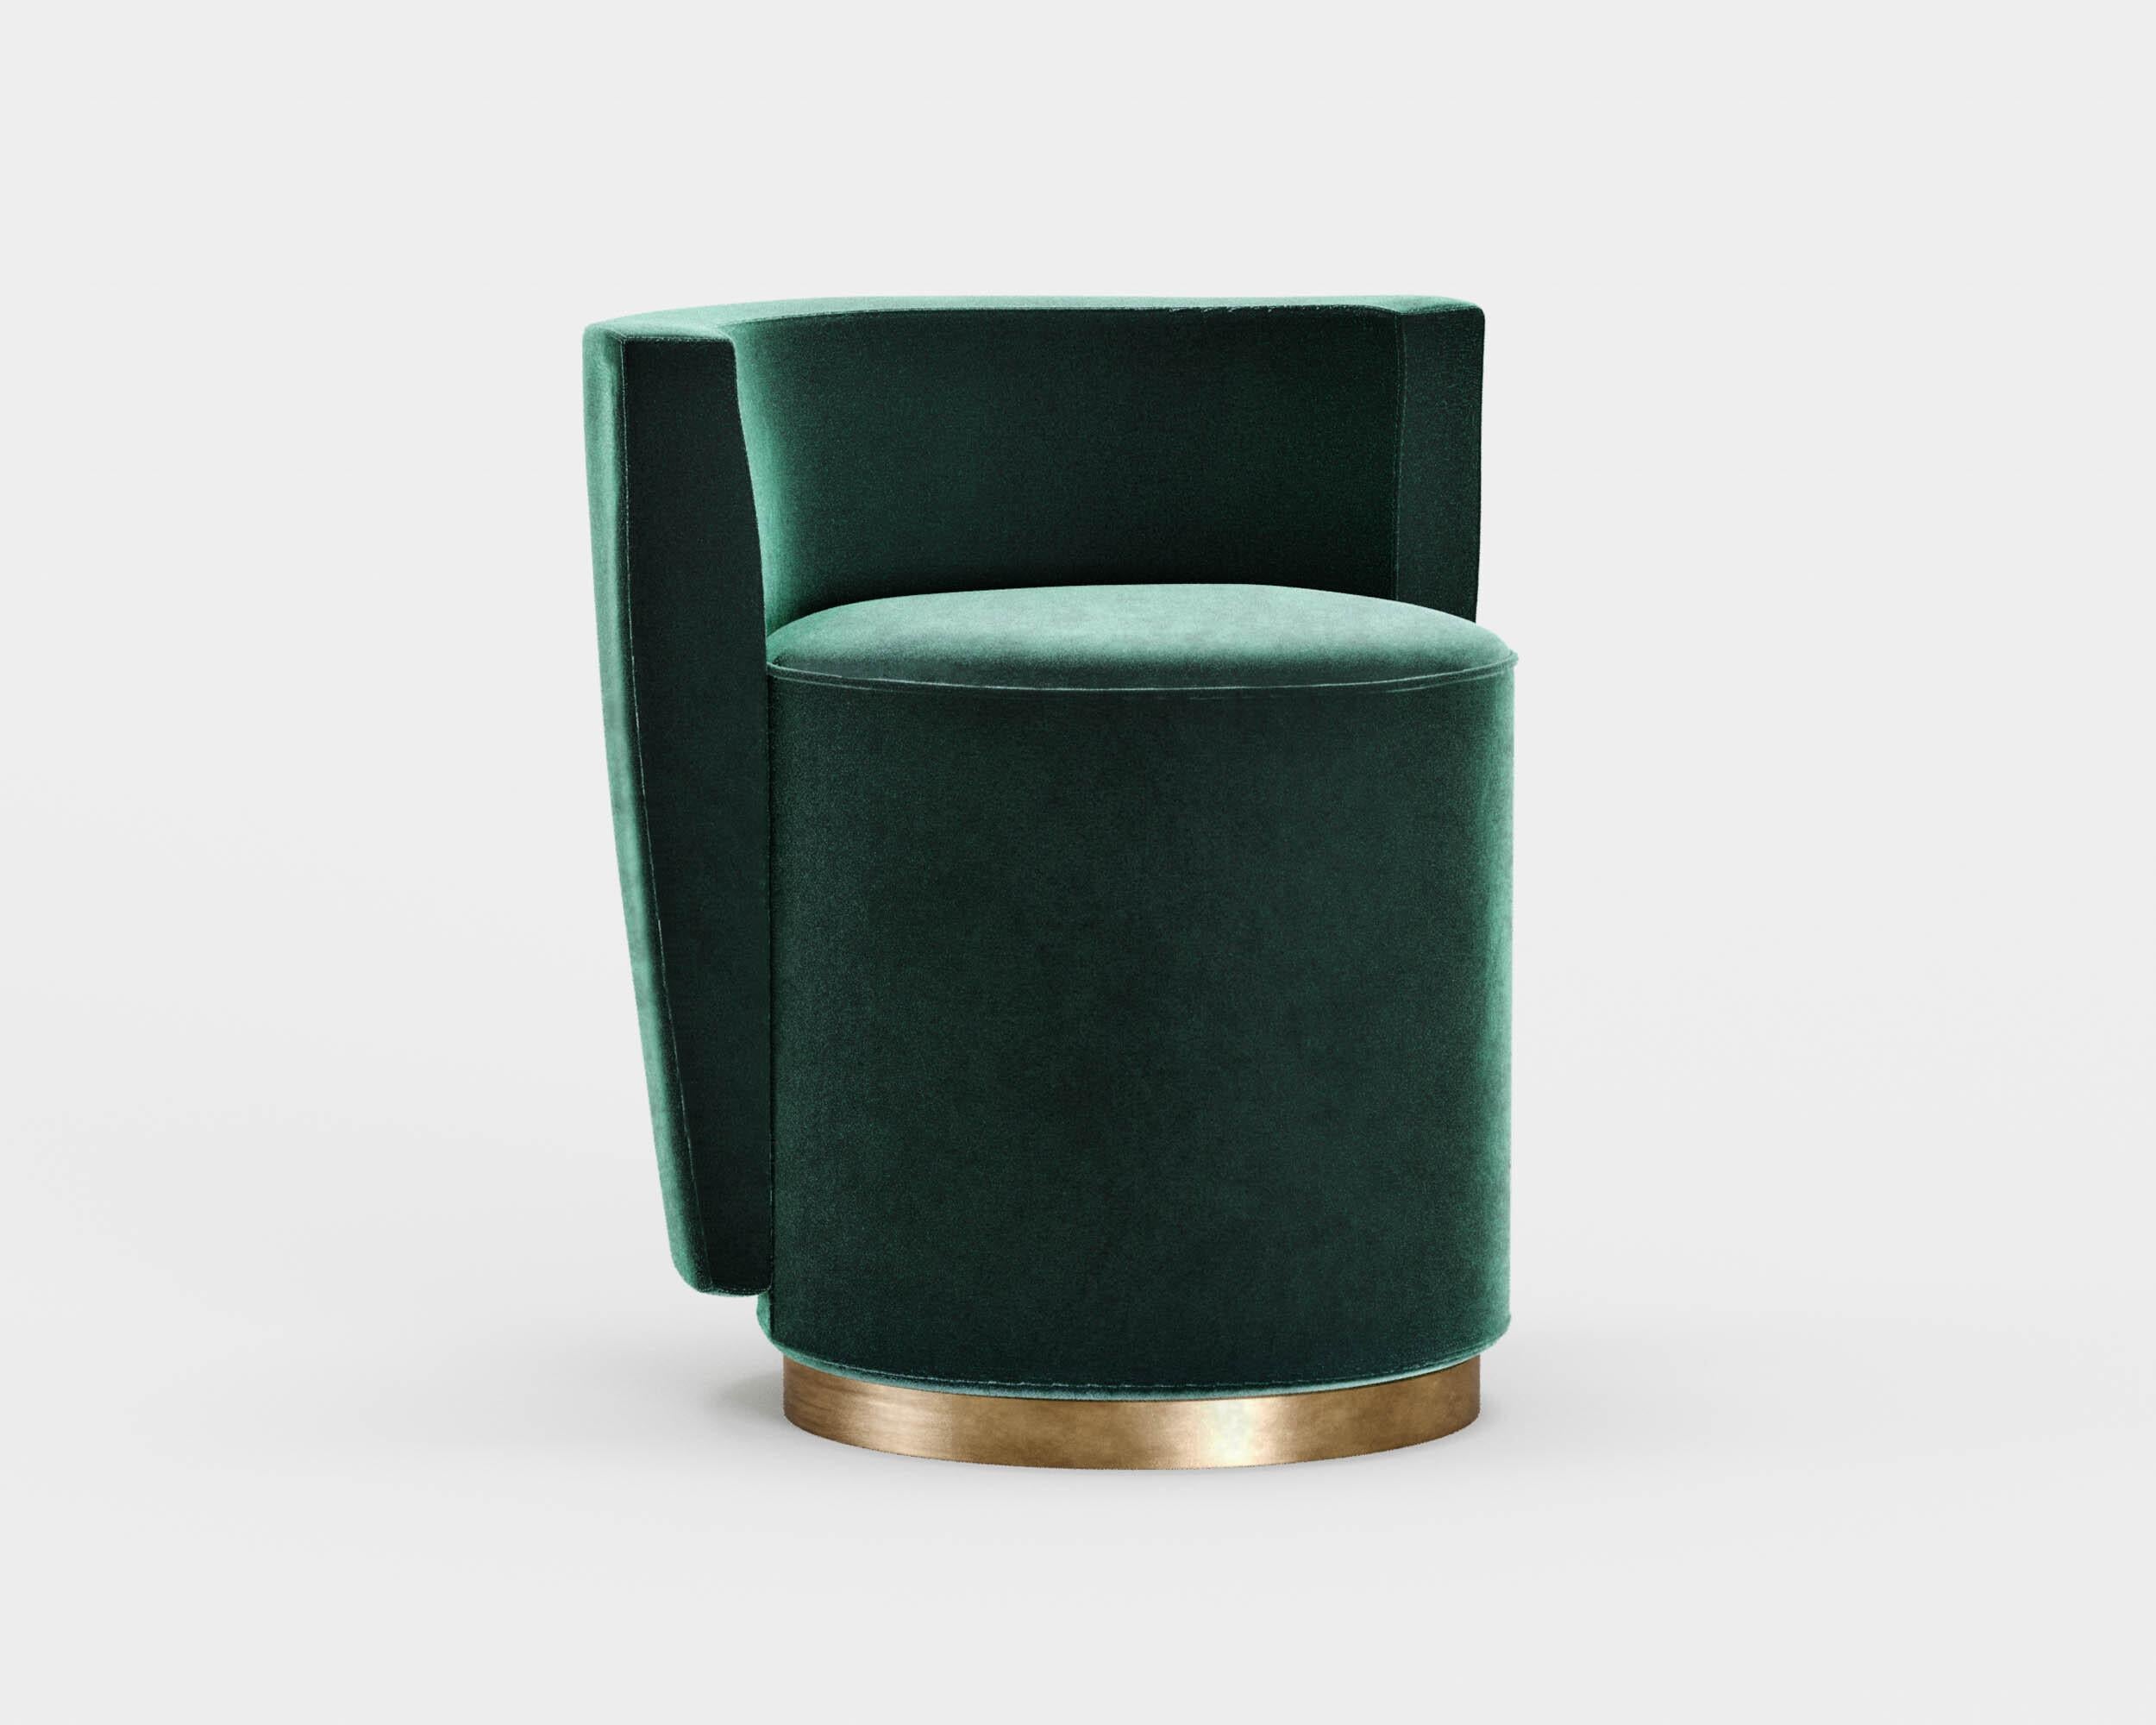 'Bond Street' Armchair by Man of Parts
Signed by Yabu Pushelberg

Dimensions: H. 65.5 x 63 x 57  cm
Seat height : 48 cm

Model shown: Kvadrat, Balboa, 0015

A wide range of fabrics is available 

__________________

The Bond Street swivel armchair